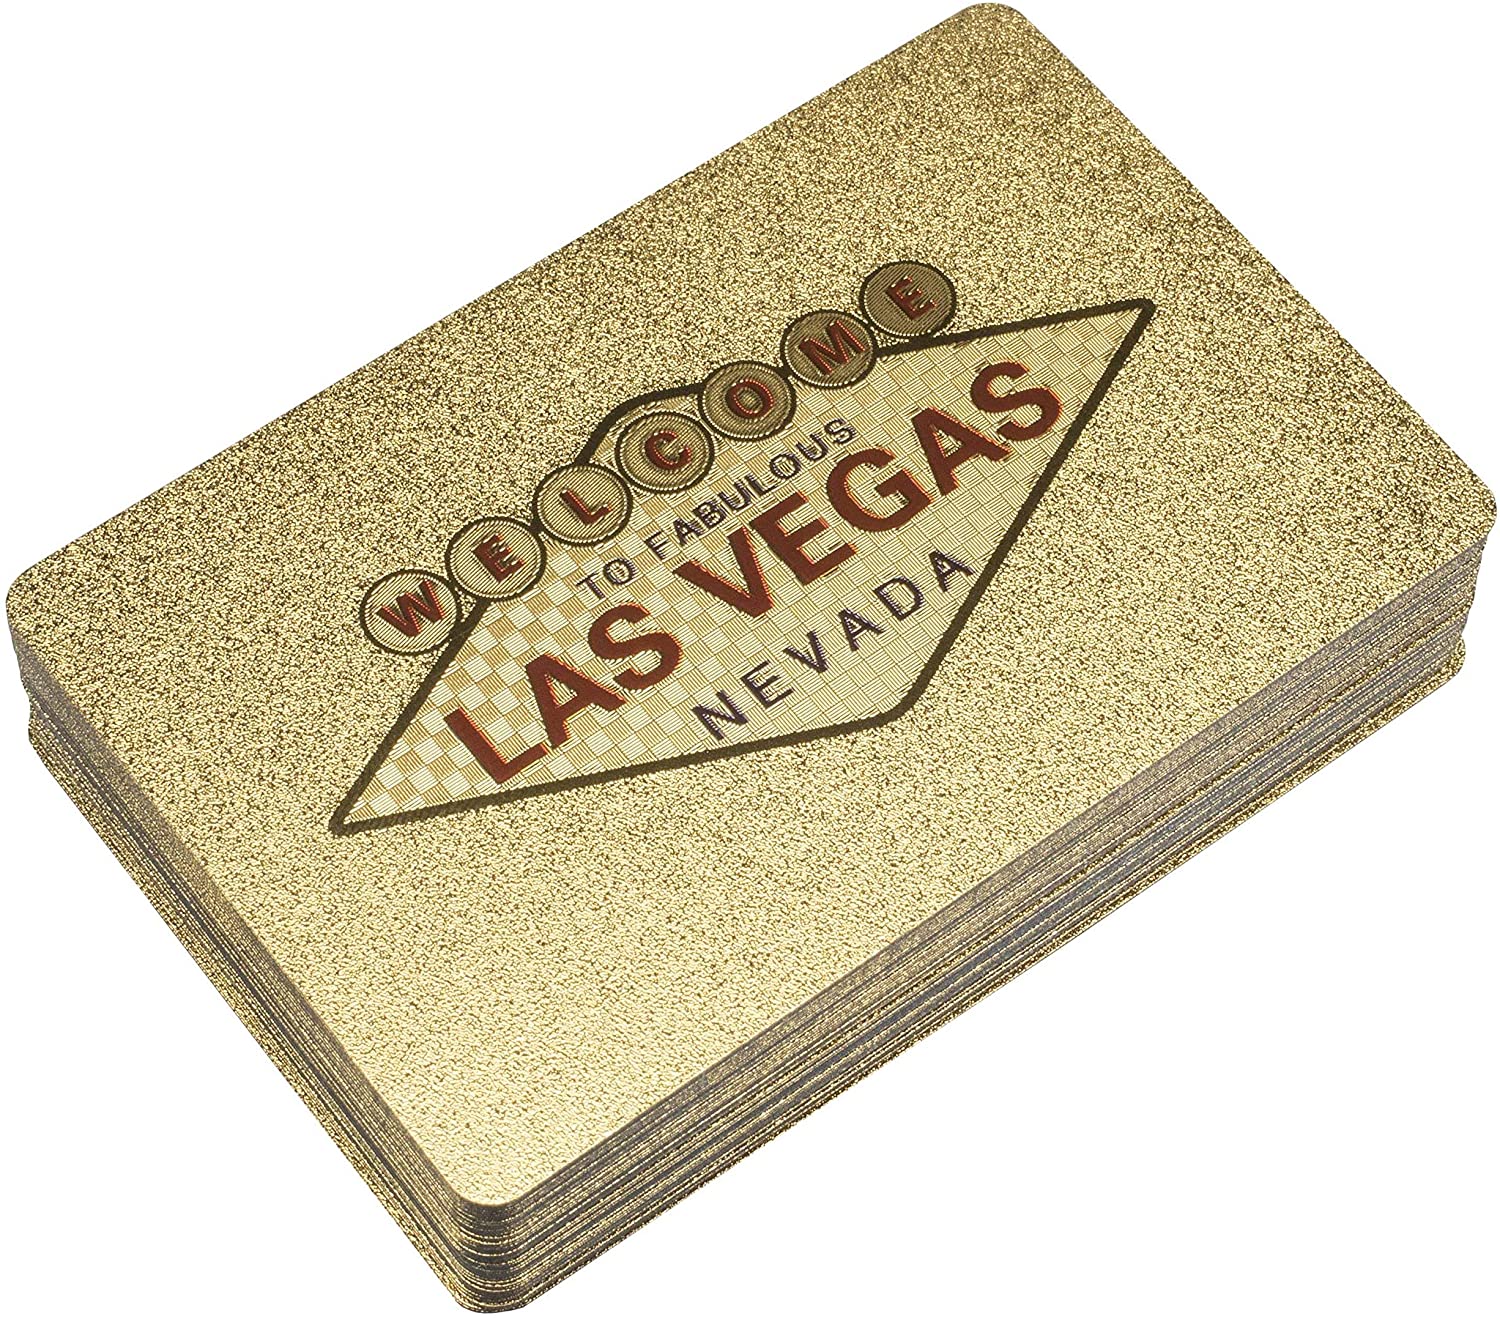 Welcome to Fabulous Las Vegas Nevada 24k Gold Foil Plated Waterproof Playing Cards 24K Gold and Silver Plated Replica Bills 6